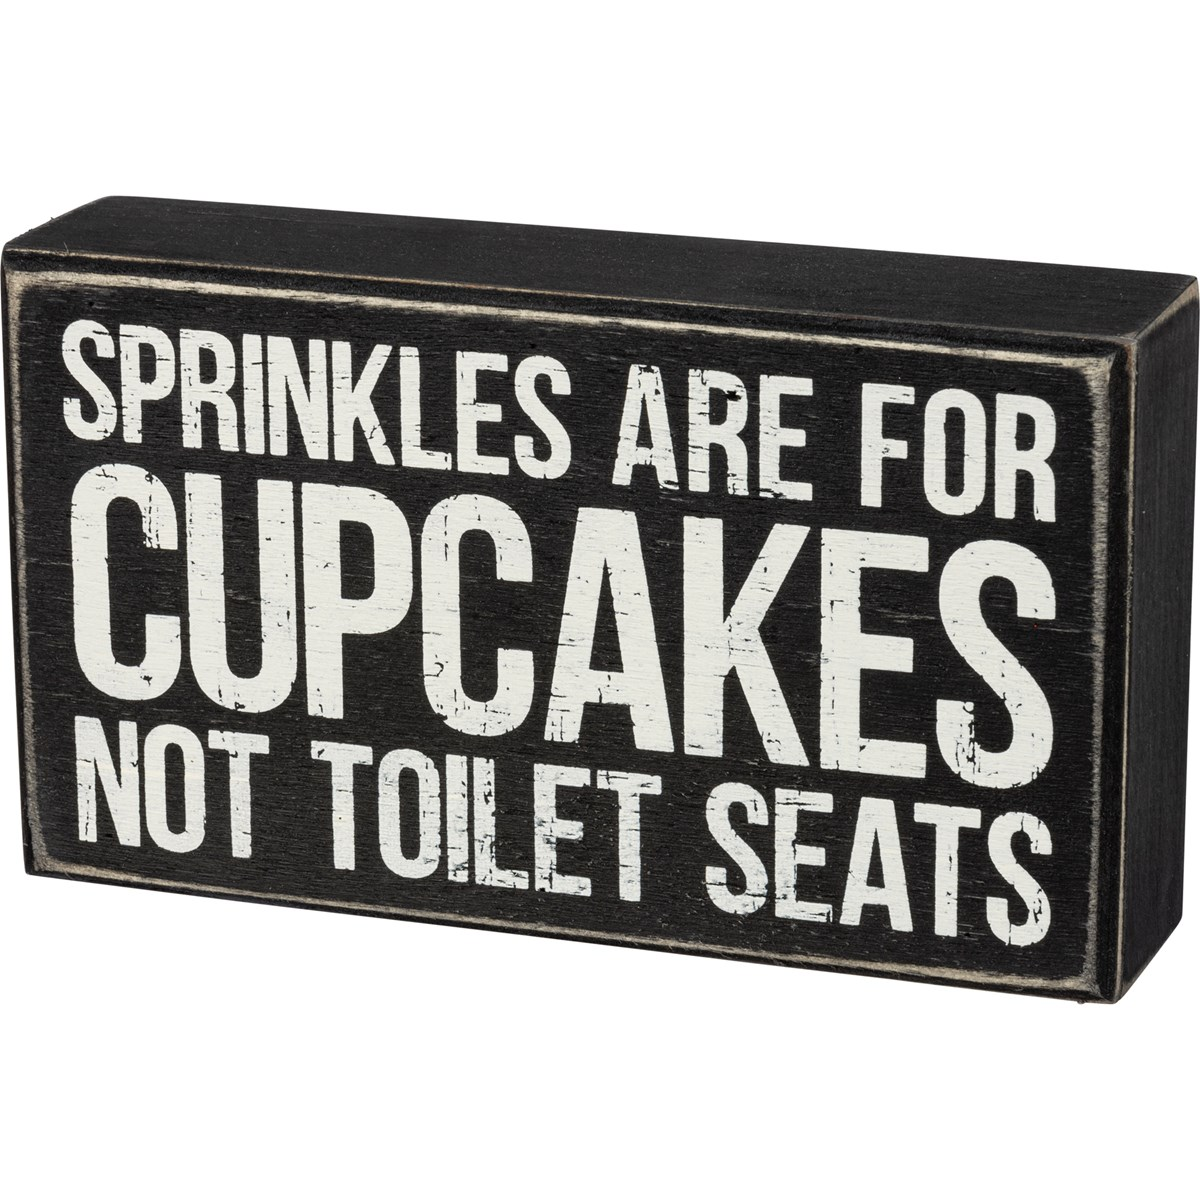 Sprinkles Are For Cupcakes Not Toilet Seats Box Sign